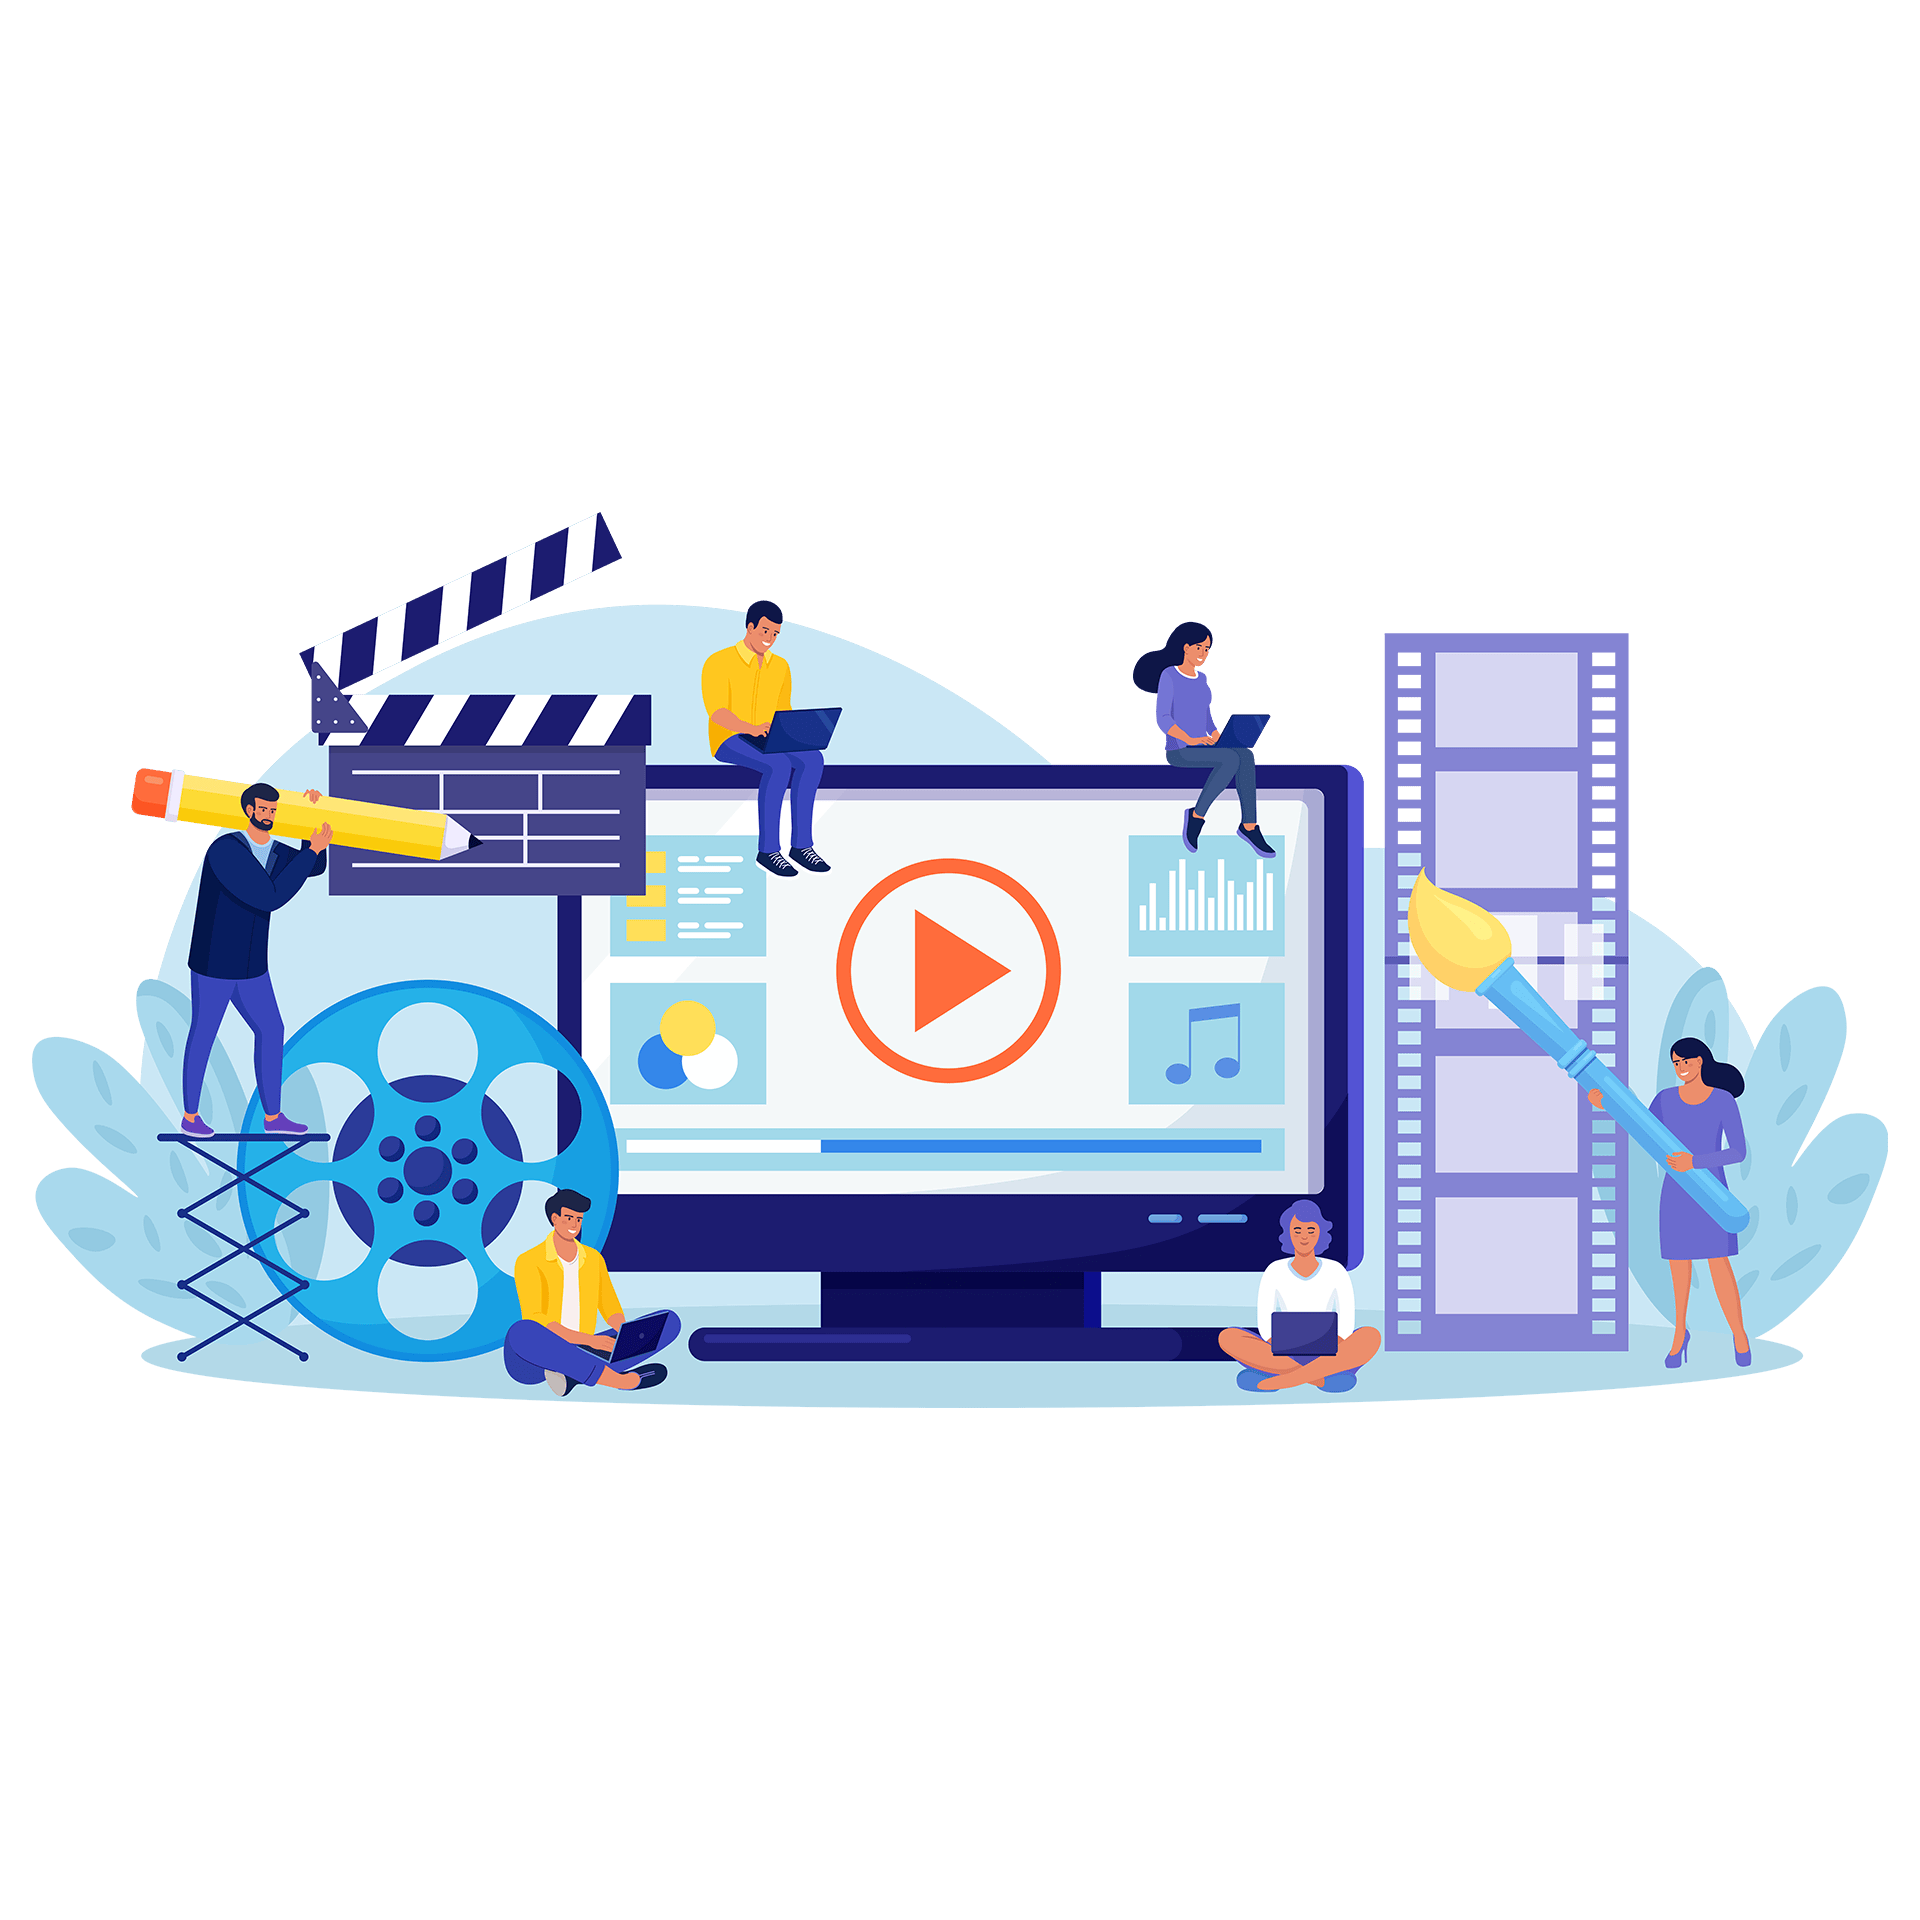 Hire an experienced video production company for your video project